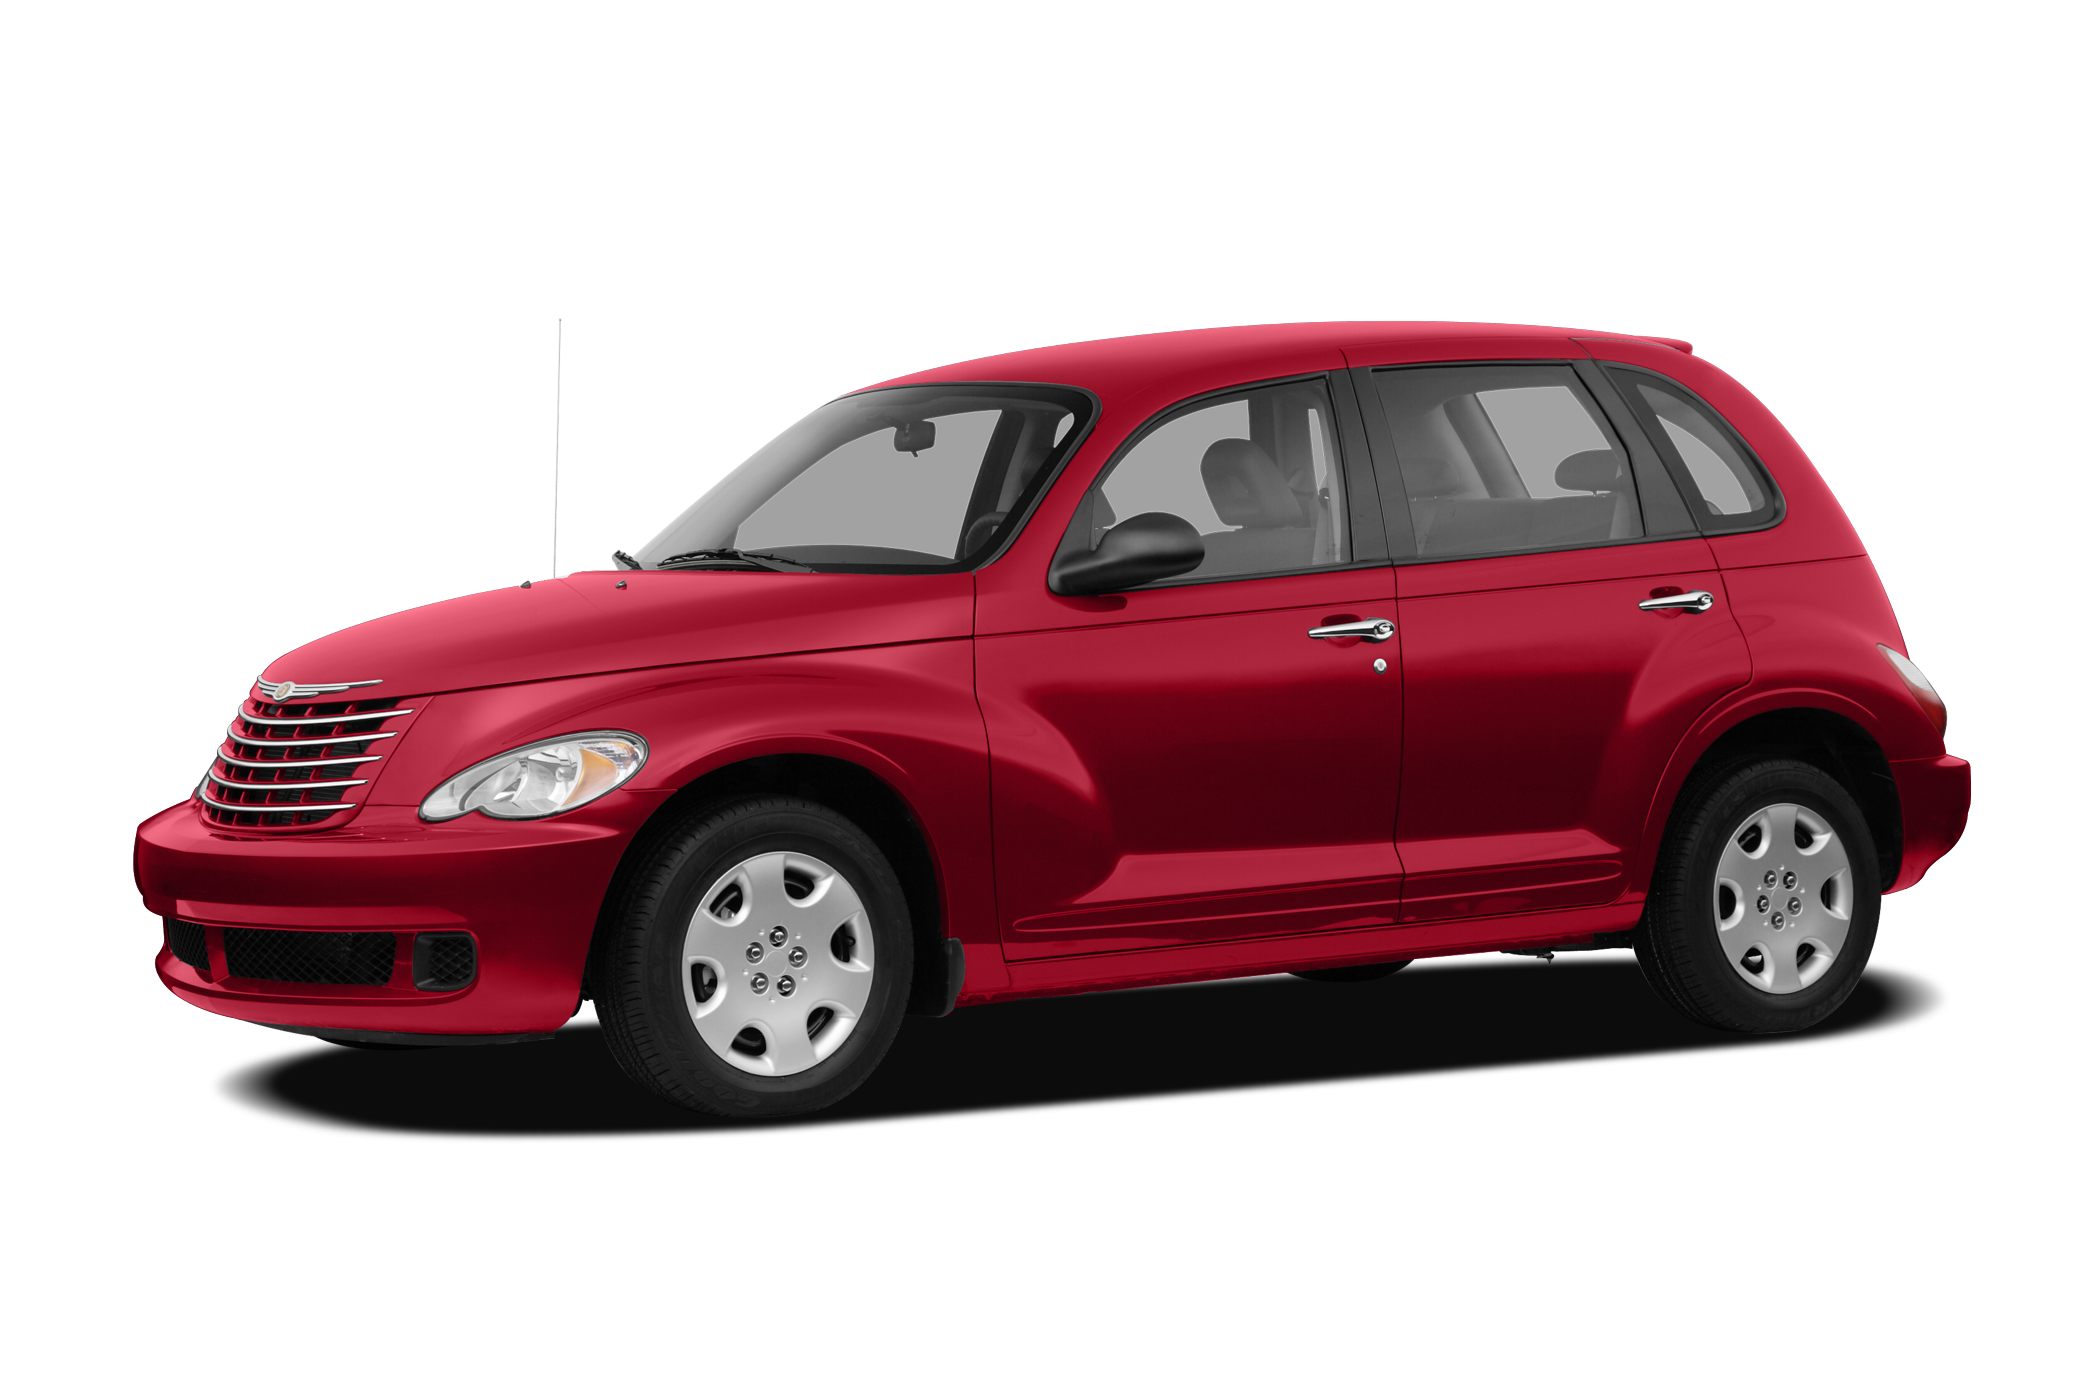 2007 Chrysler Pt Cruiser Touring 4dr Front Wheel Drive Pictures